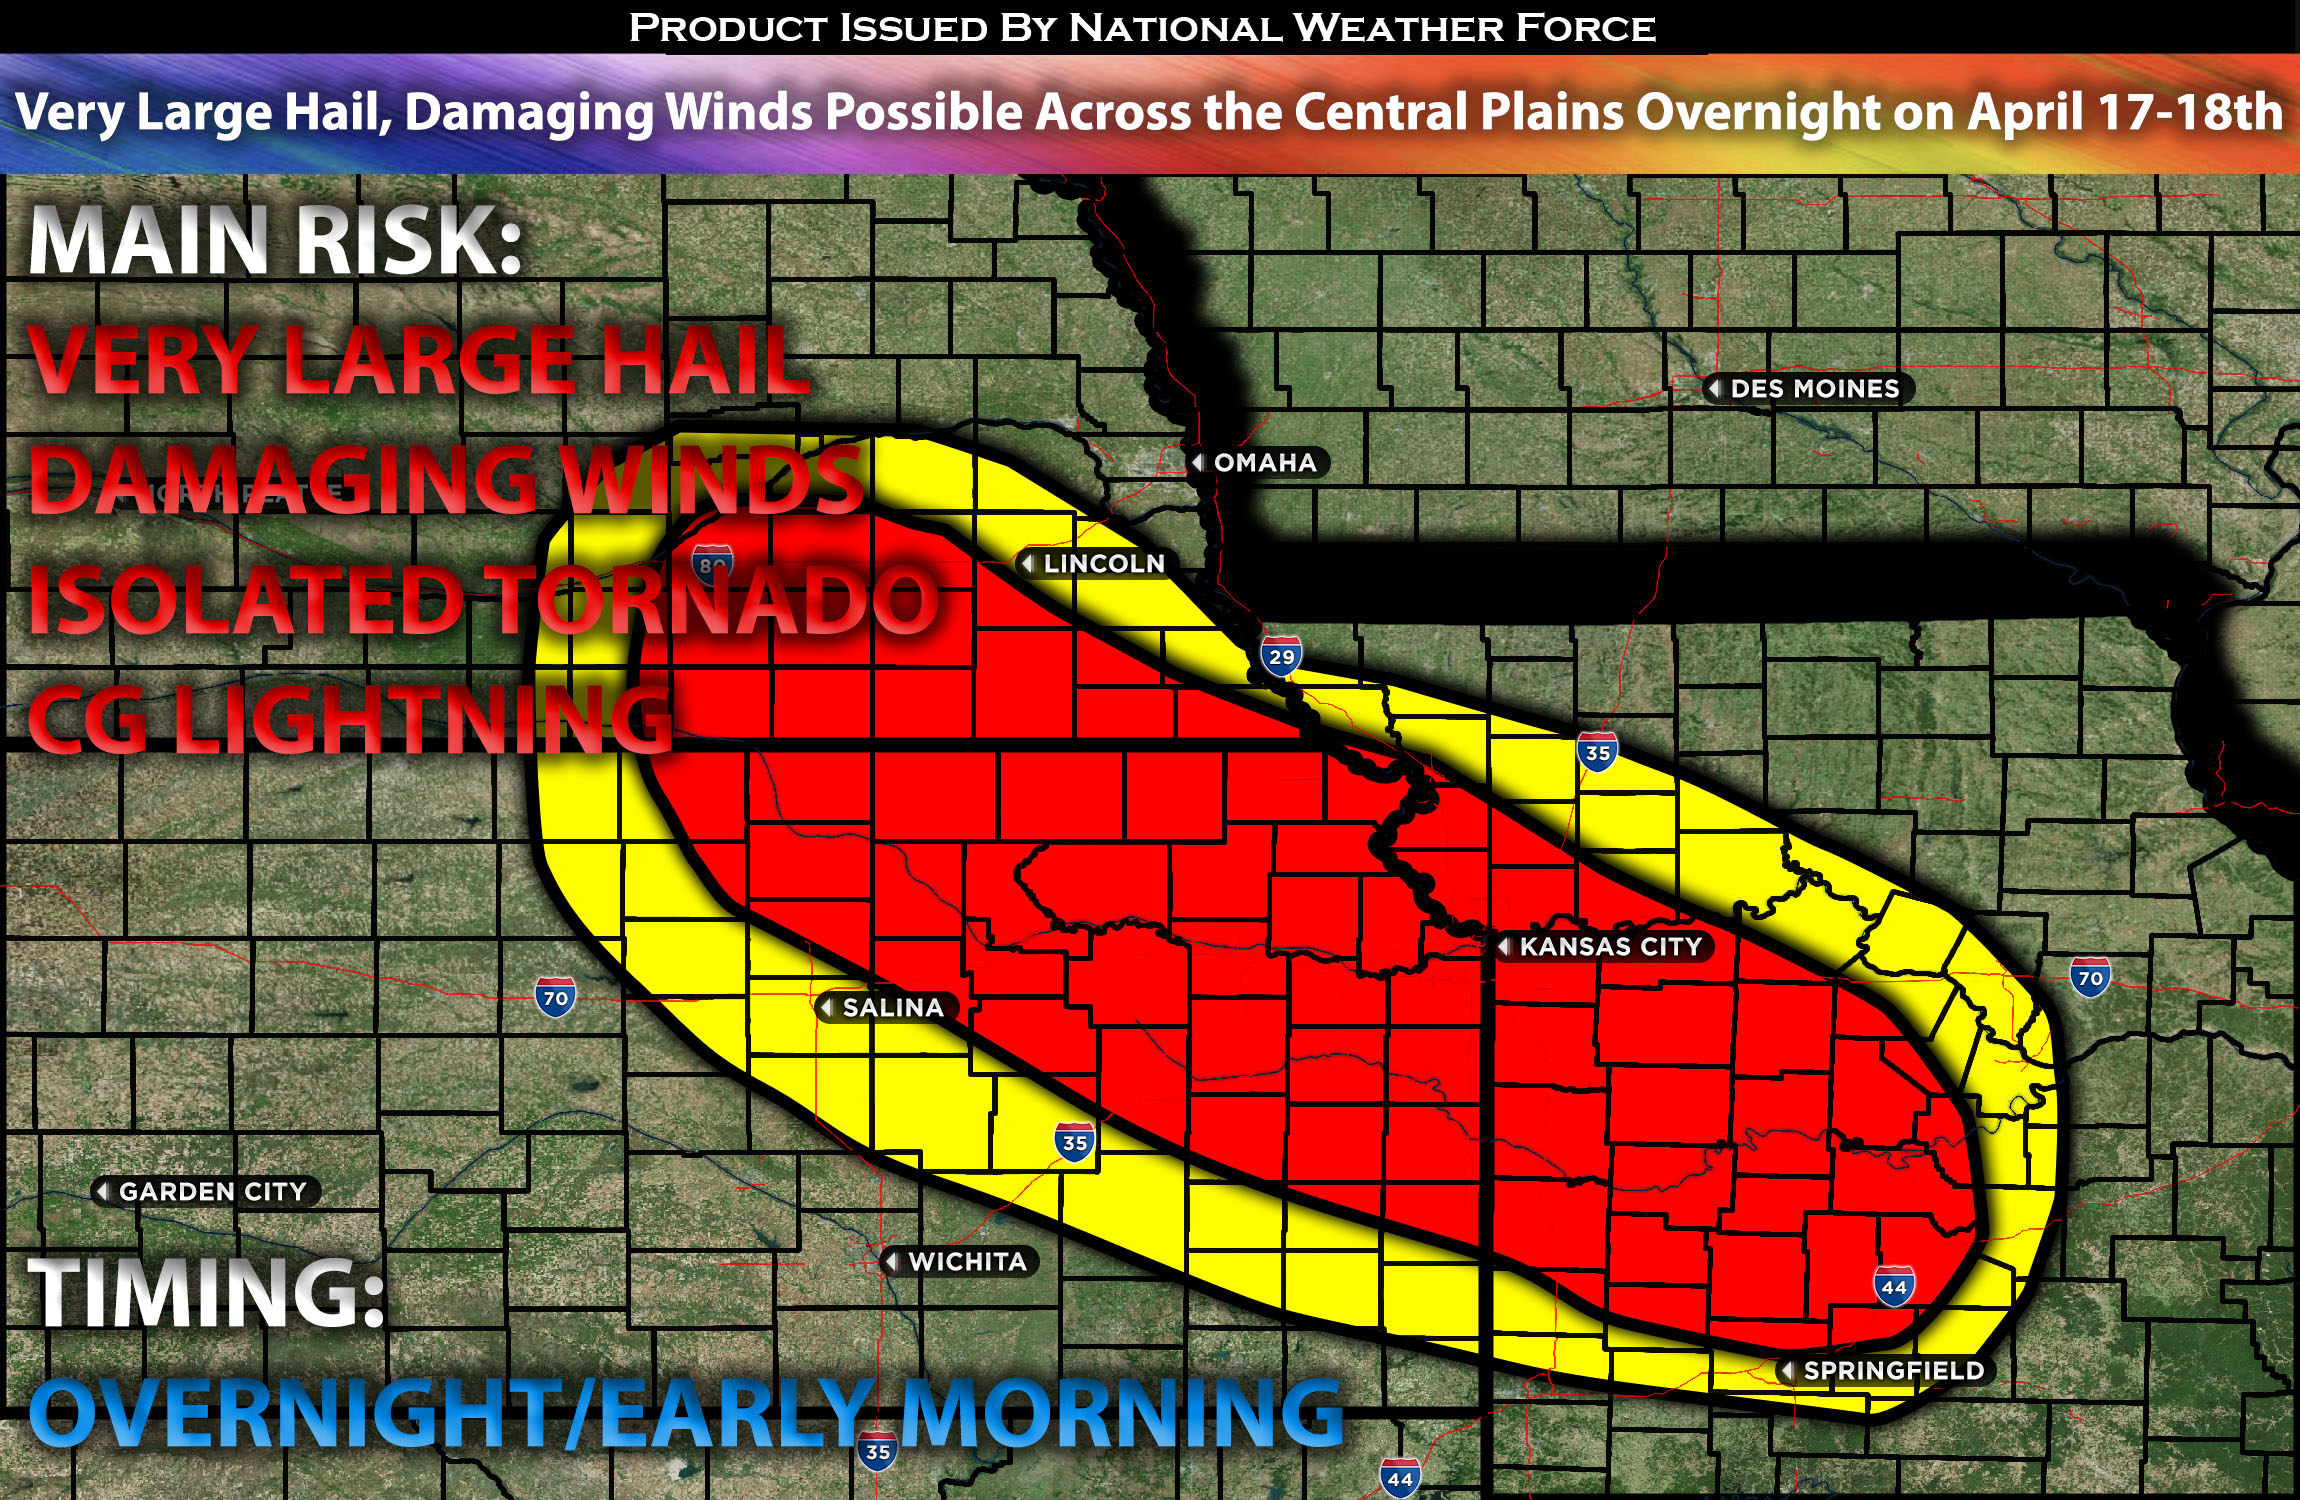 Very Large Hail, Damaging Winds Possible Across the Central Plains Overnight on April 17-18th